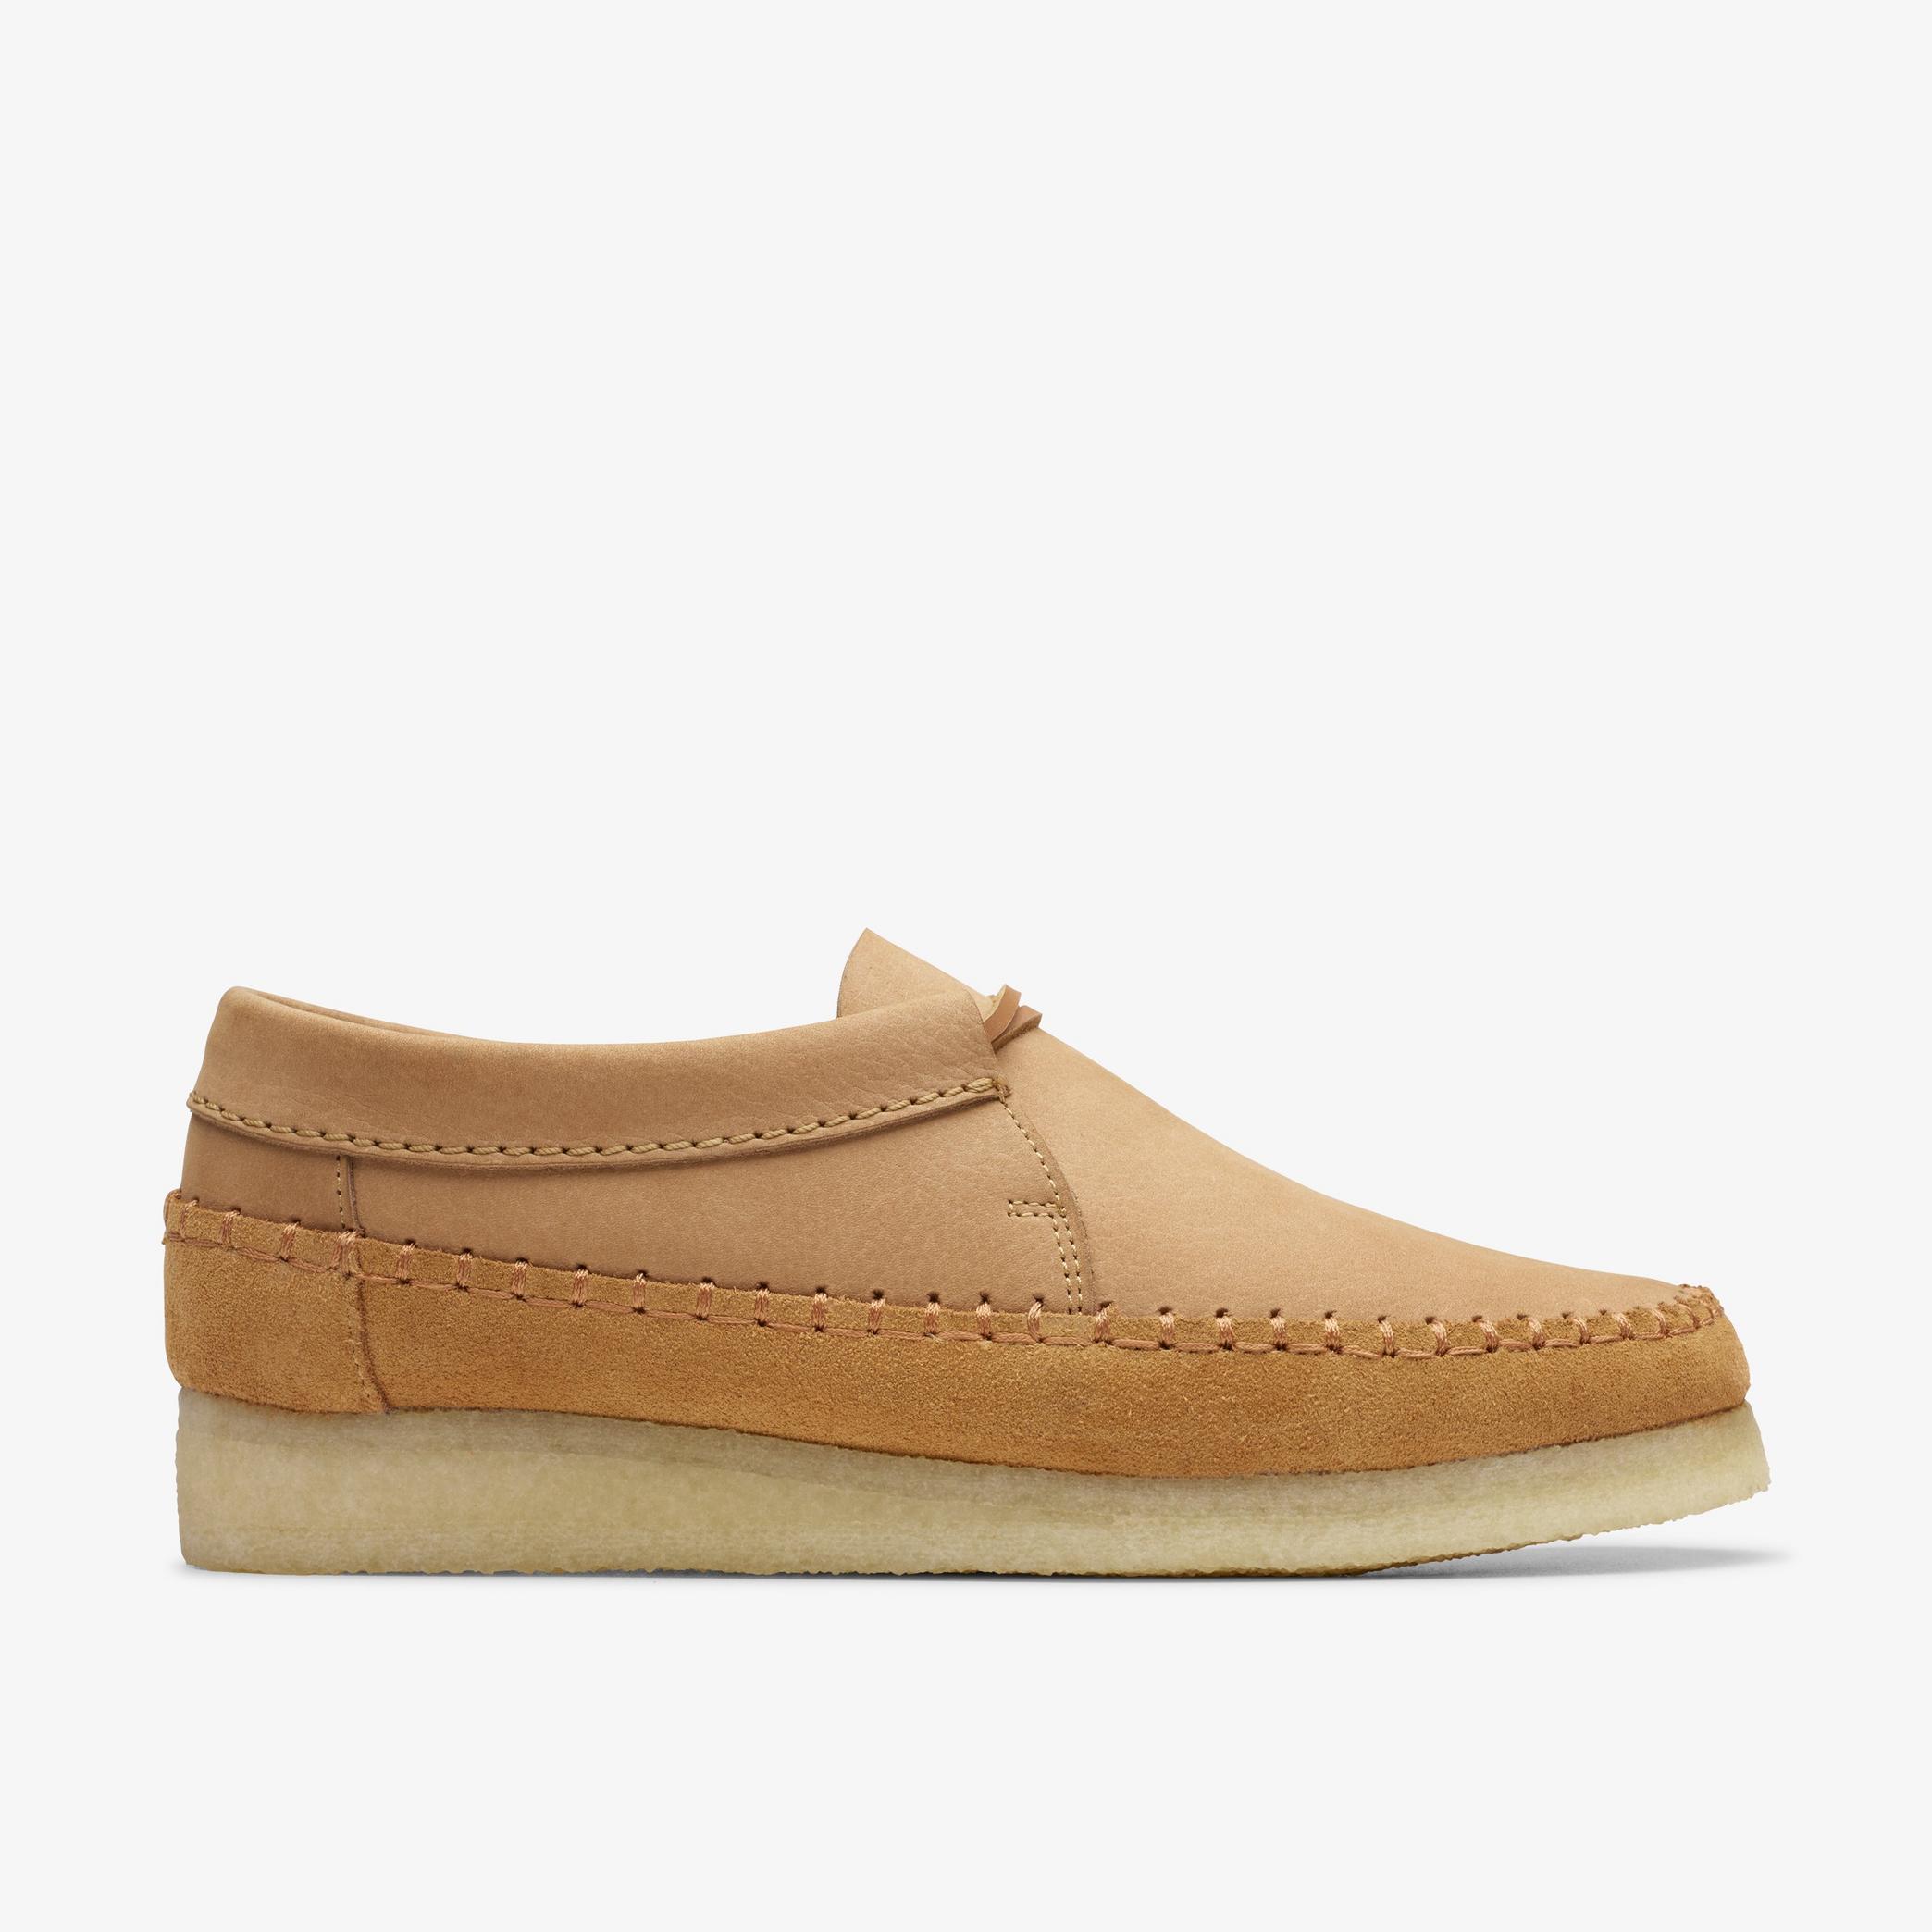 Weaver Tie Tan Suede Moccasins, view 1 of 6